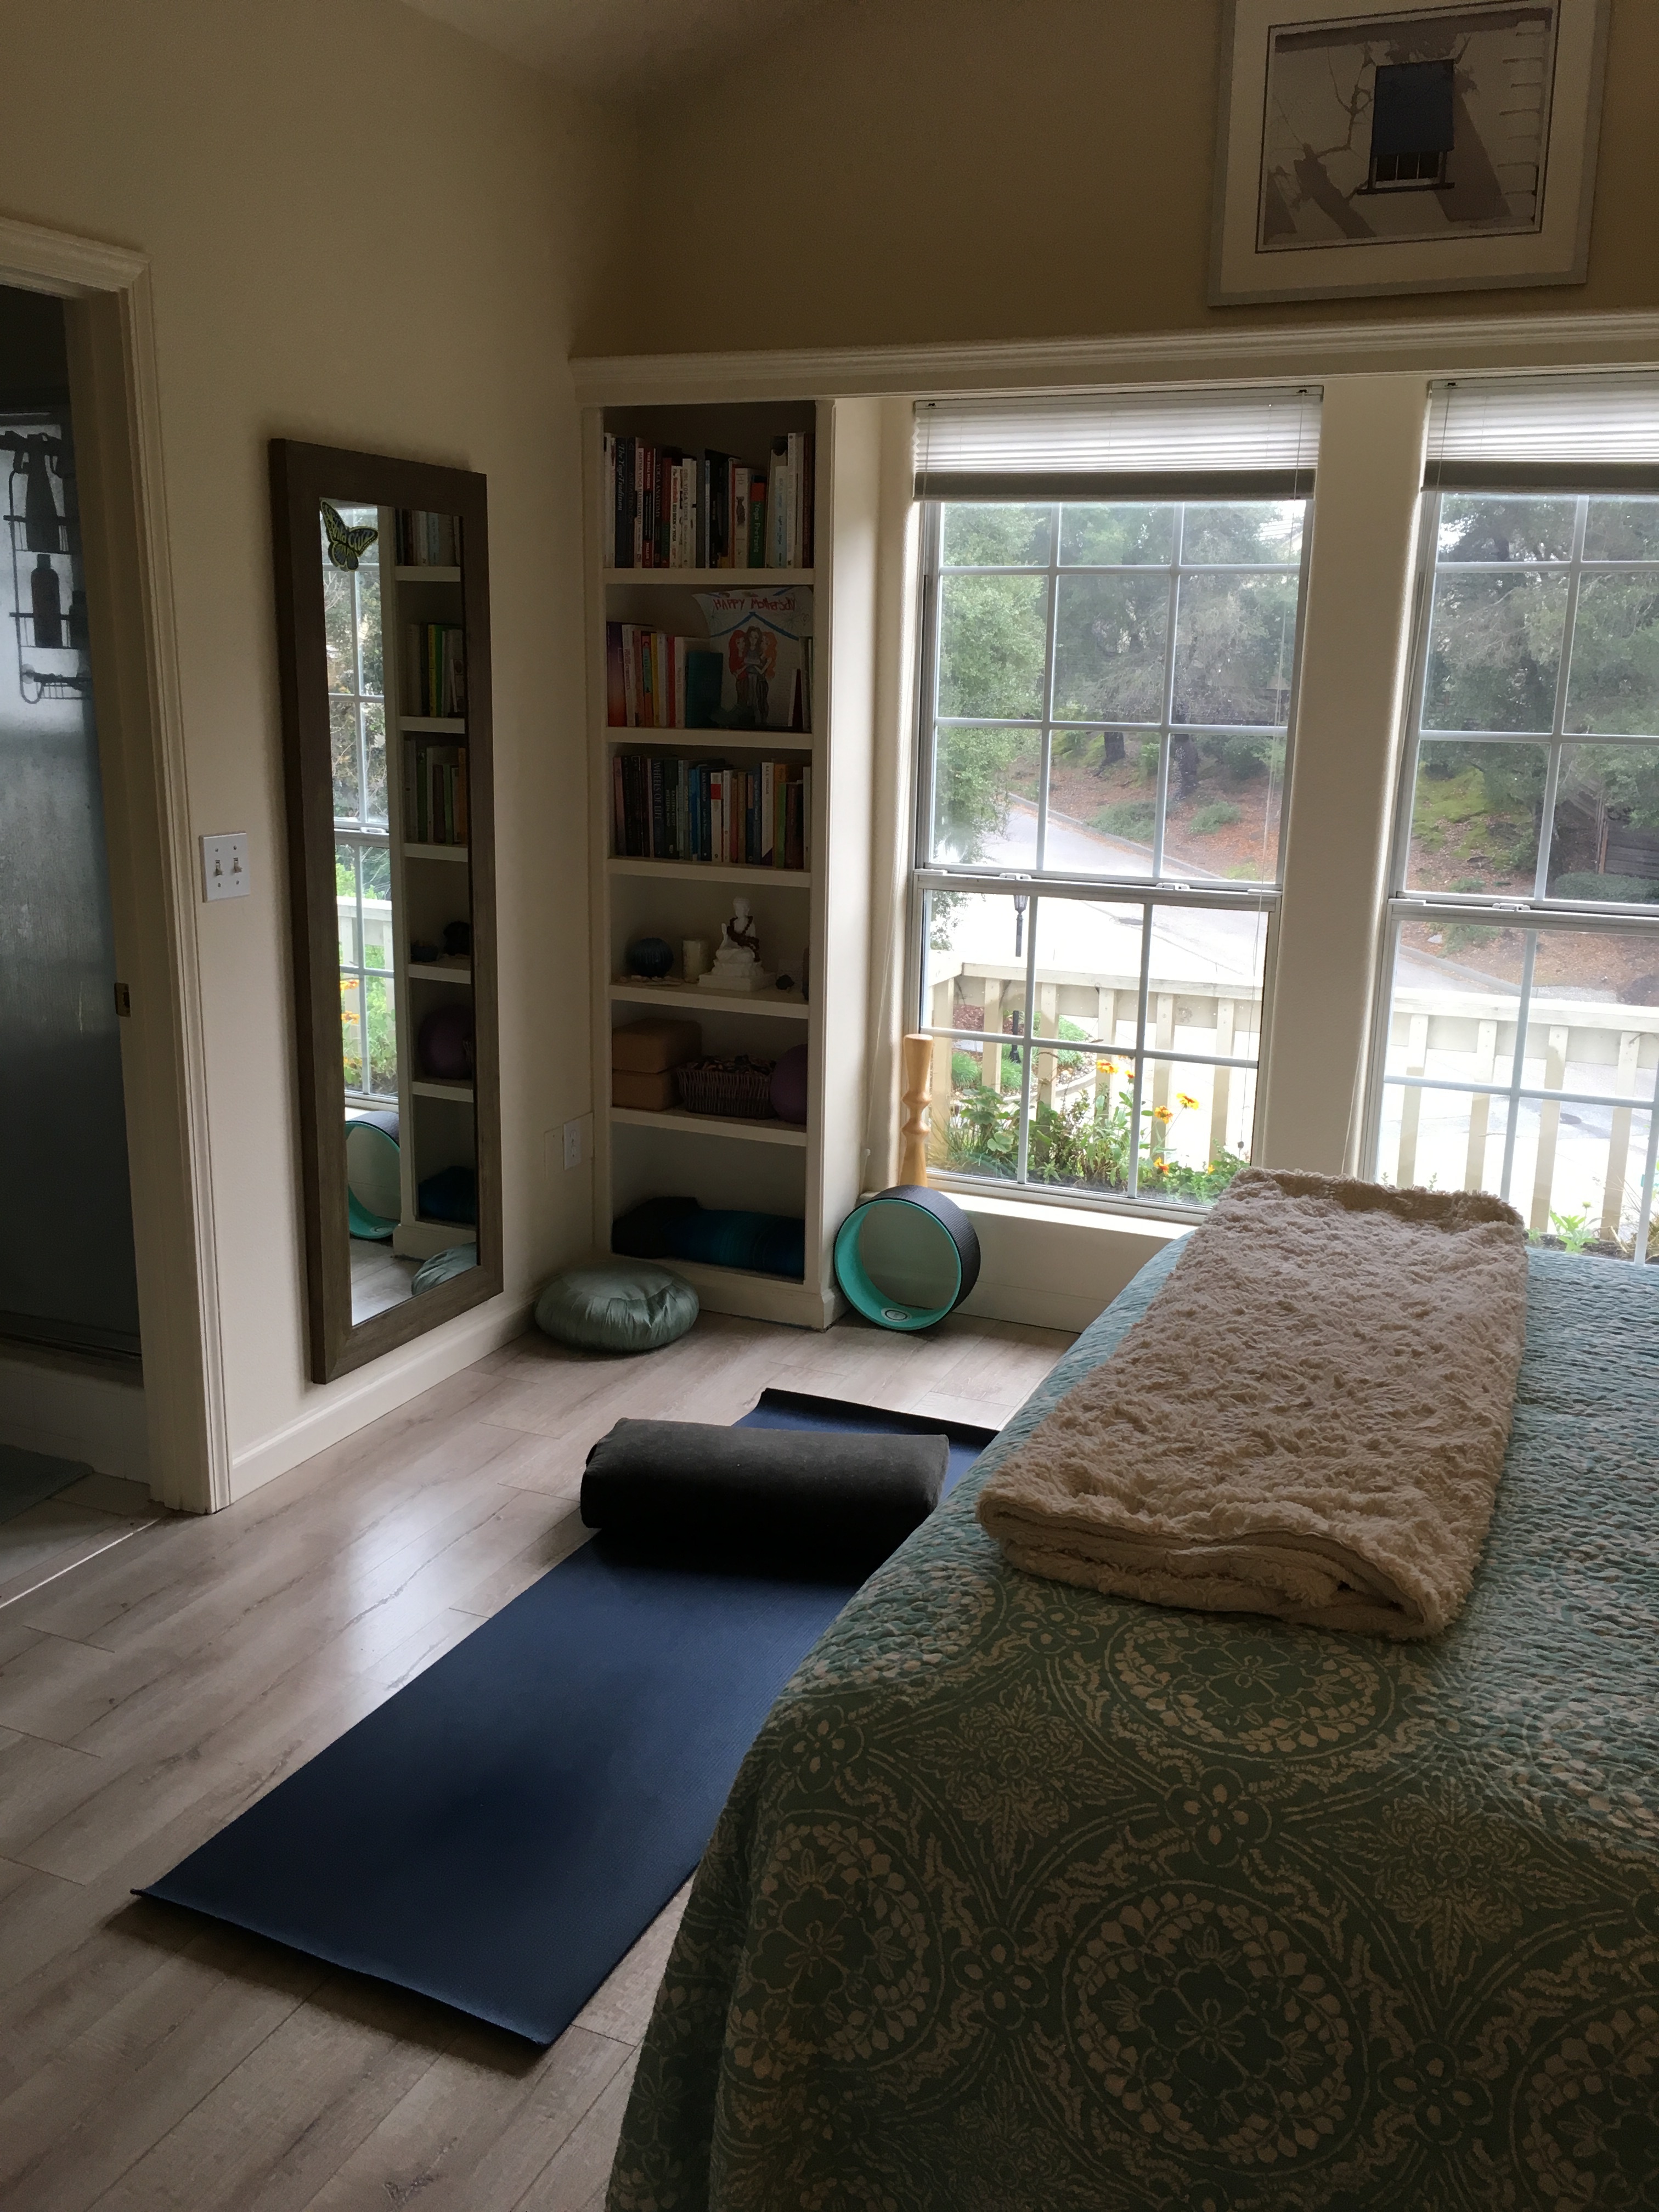 Home Yoga Space with Mat at Foot of Bed